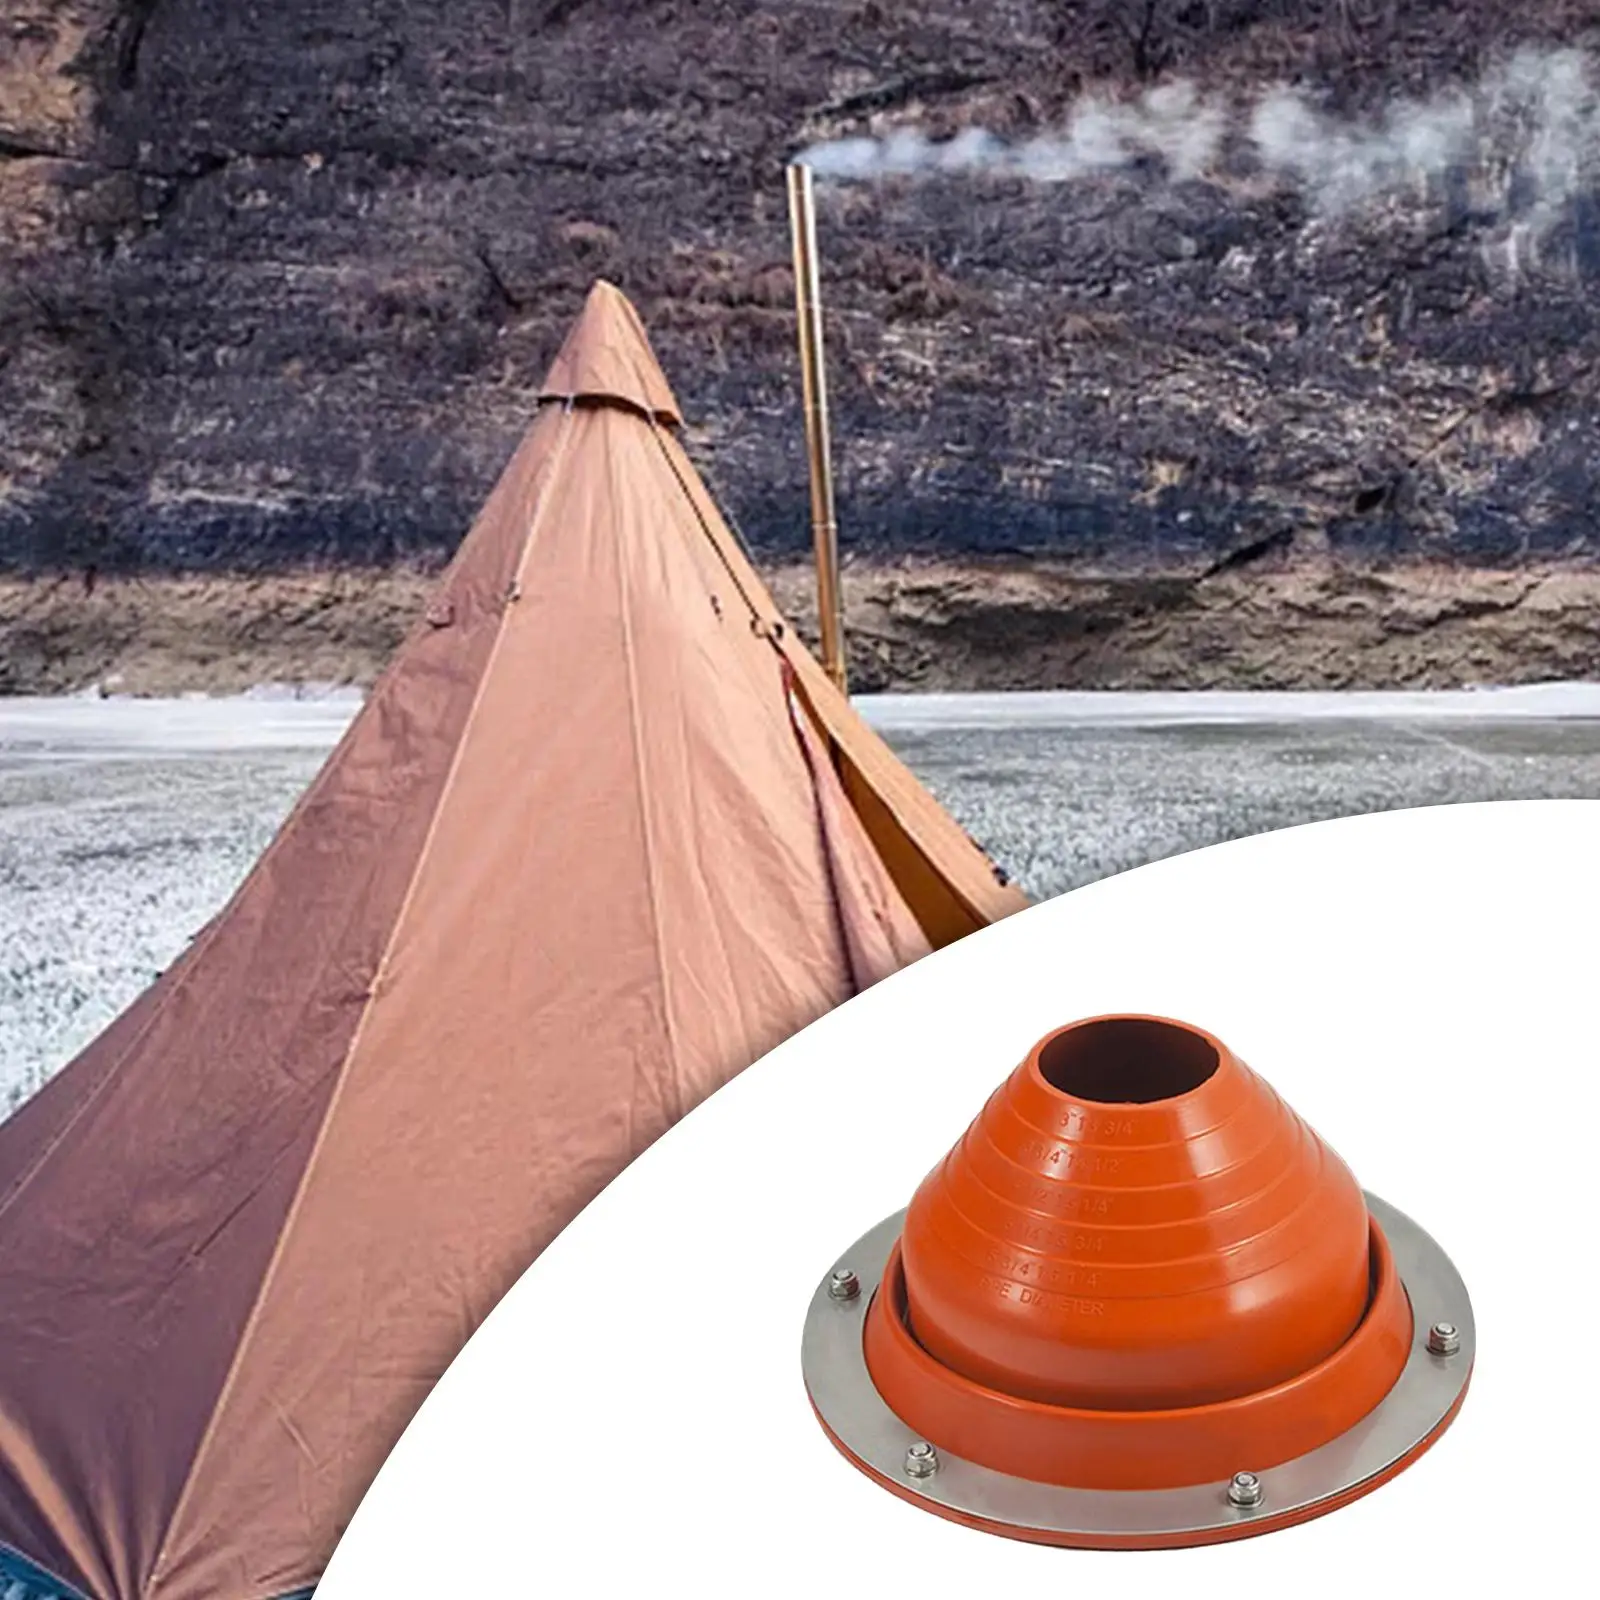  Jack Kit For Tent Flexible Roof Pipe Flashing  Flashing Kit Heat Resistant Silicone